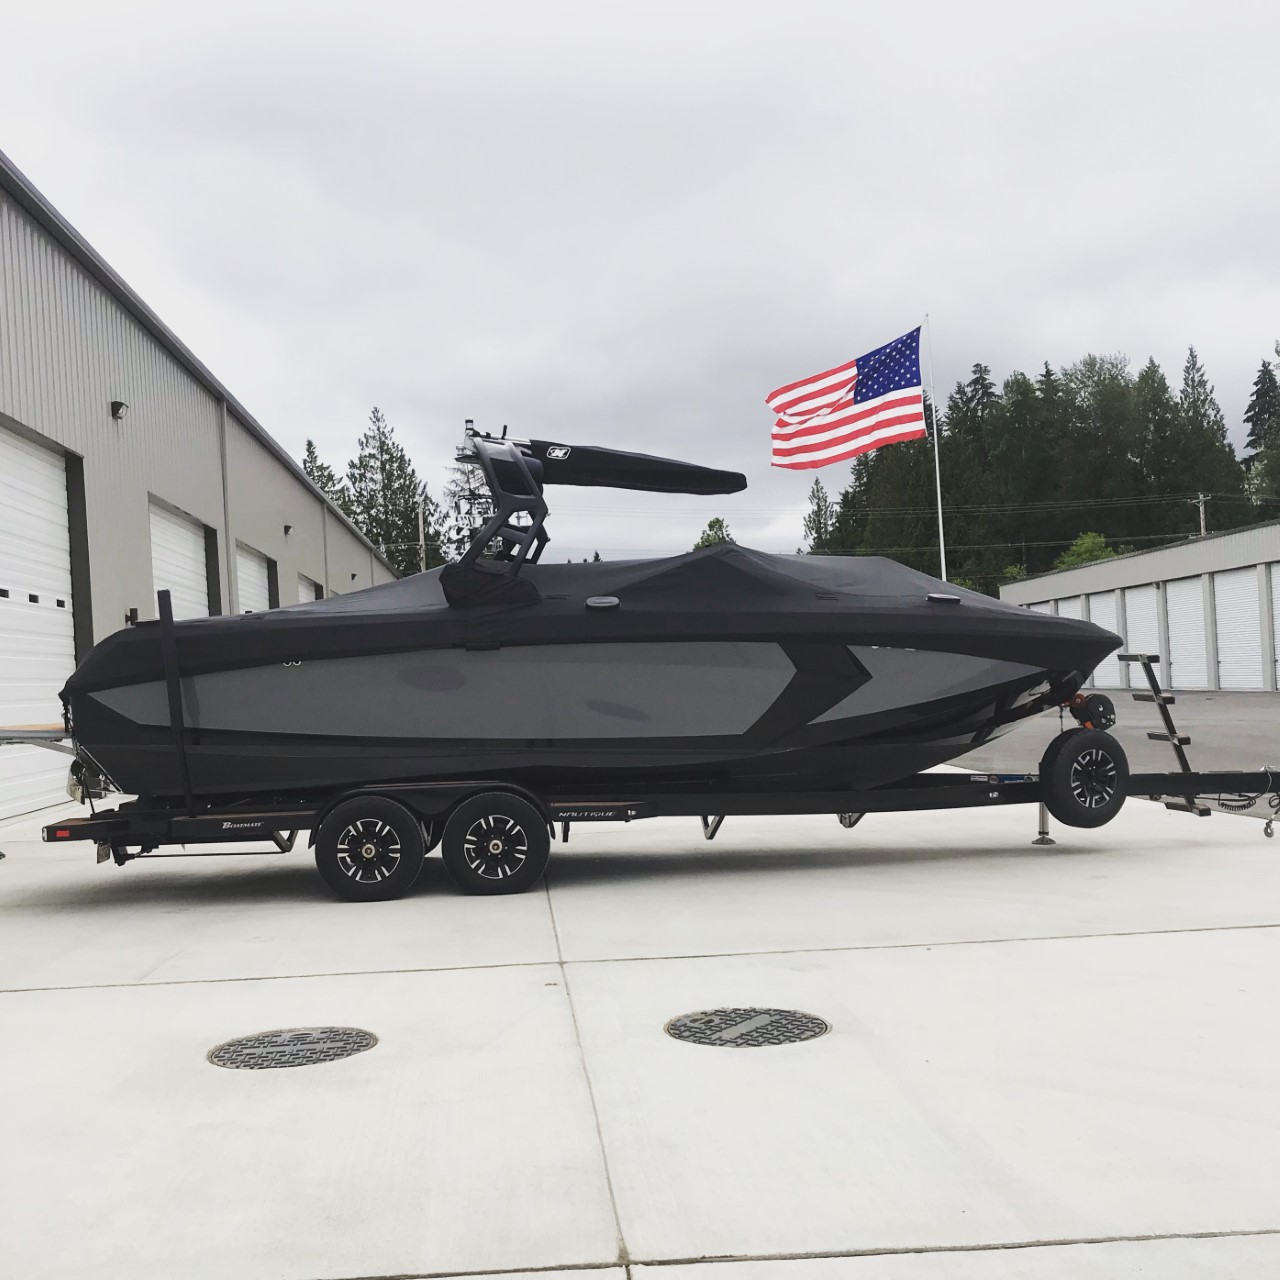 Store Your Boat in an Indoor Heated Storage in Arlington, WA